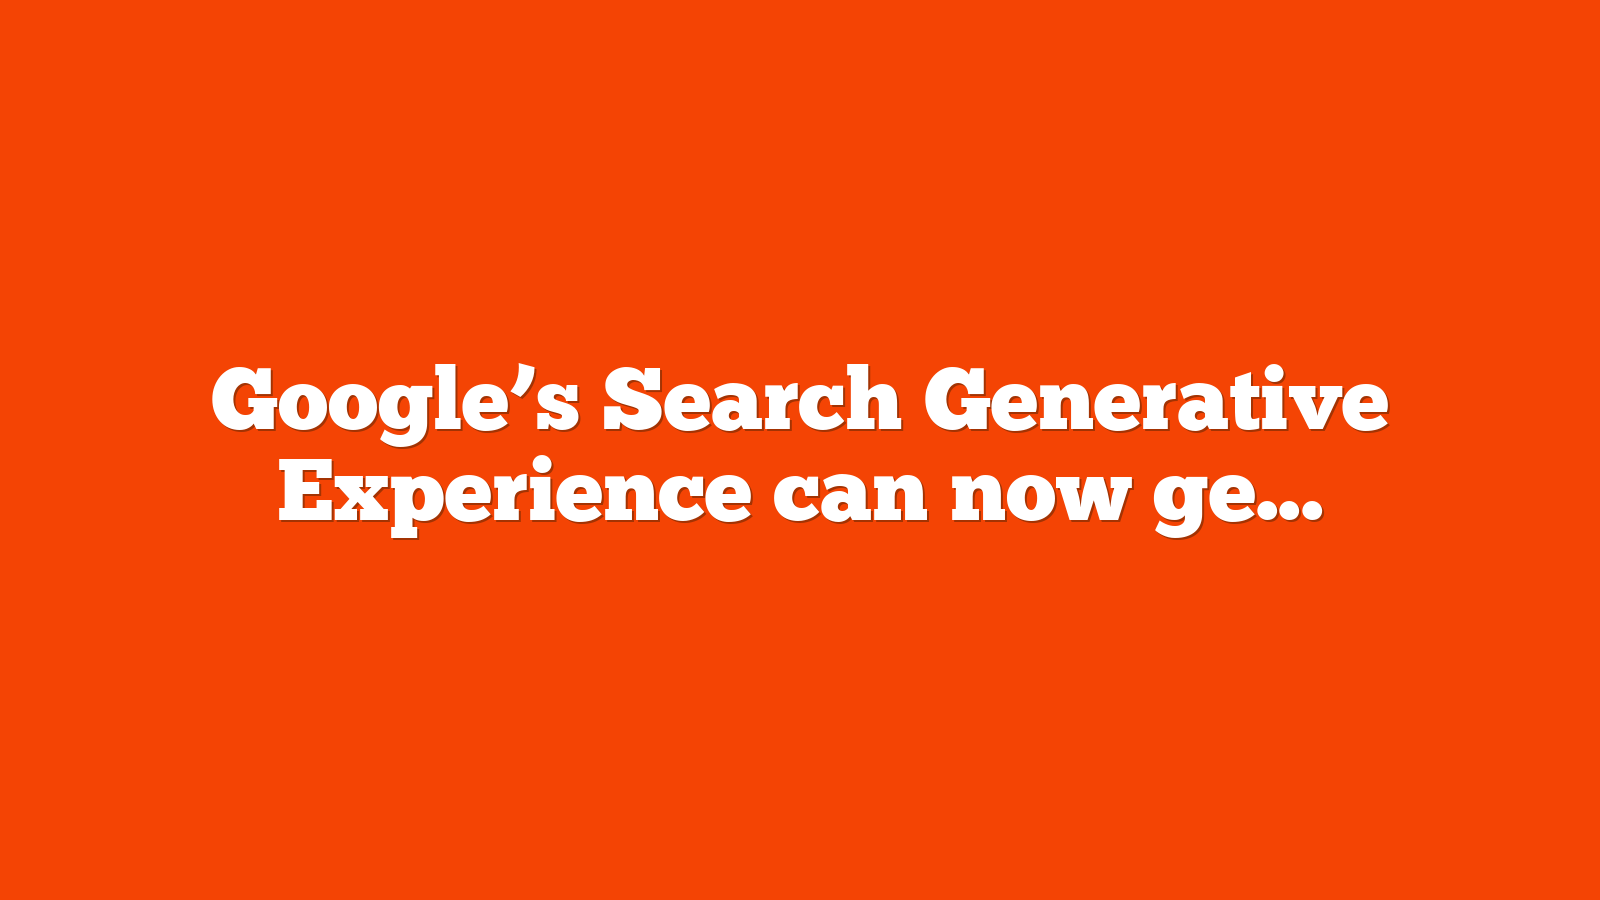 Google’s Search Generative Experience can now generate answers in half the time